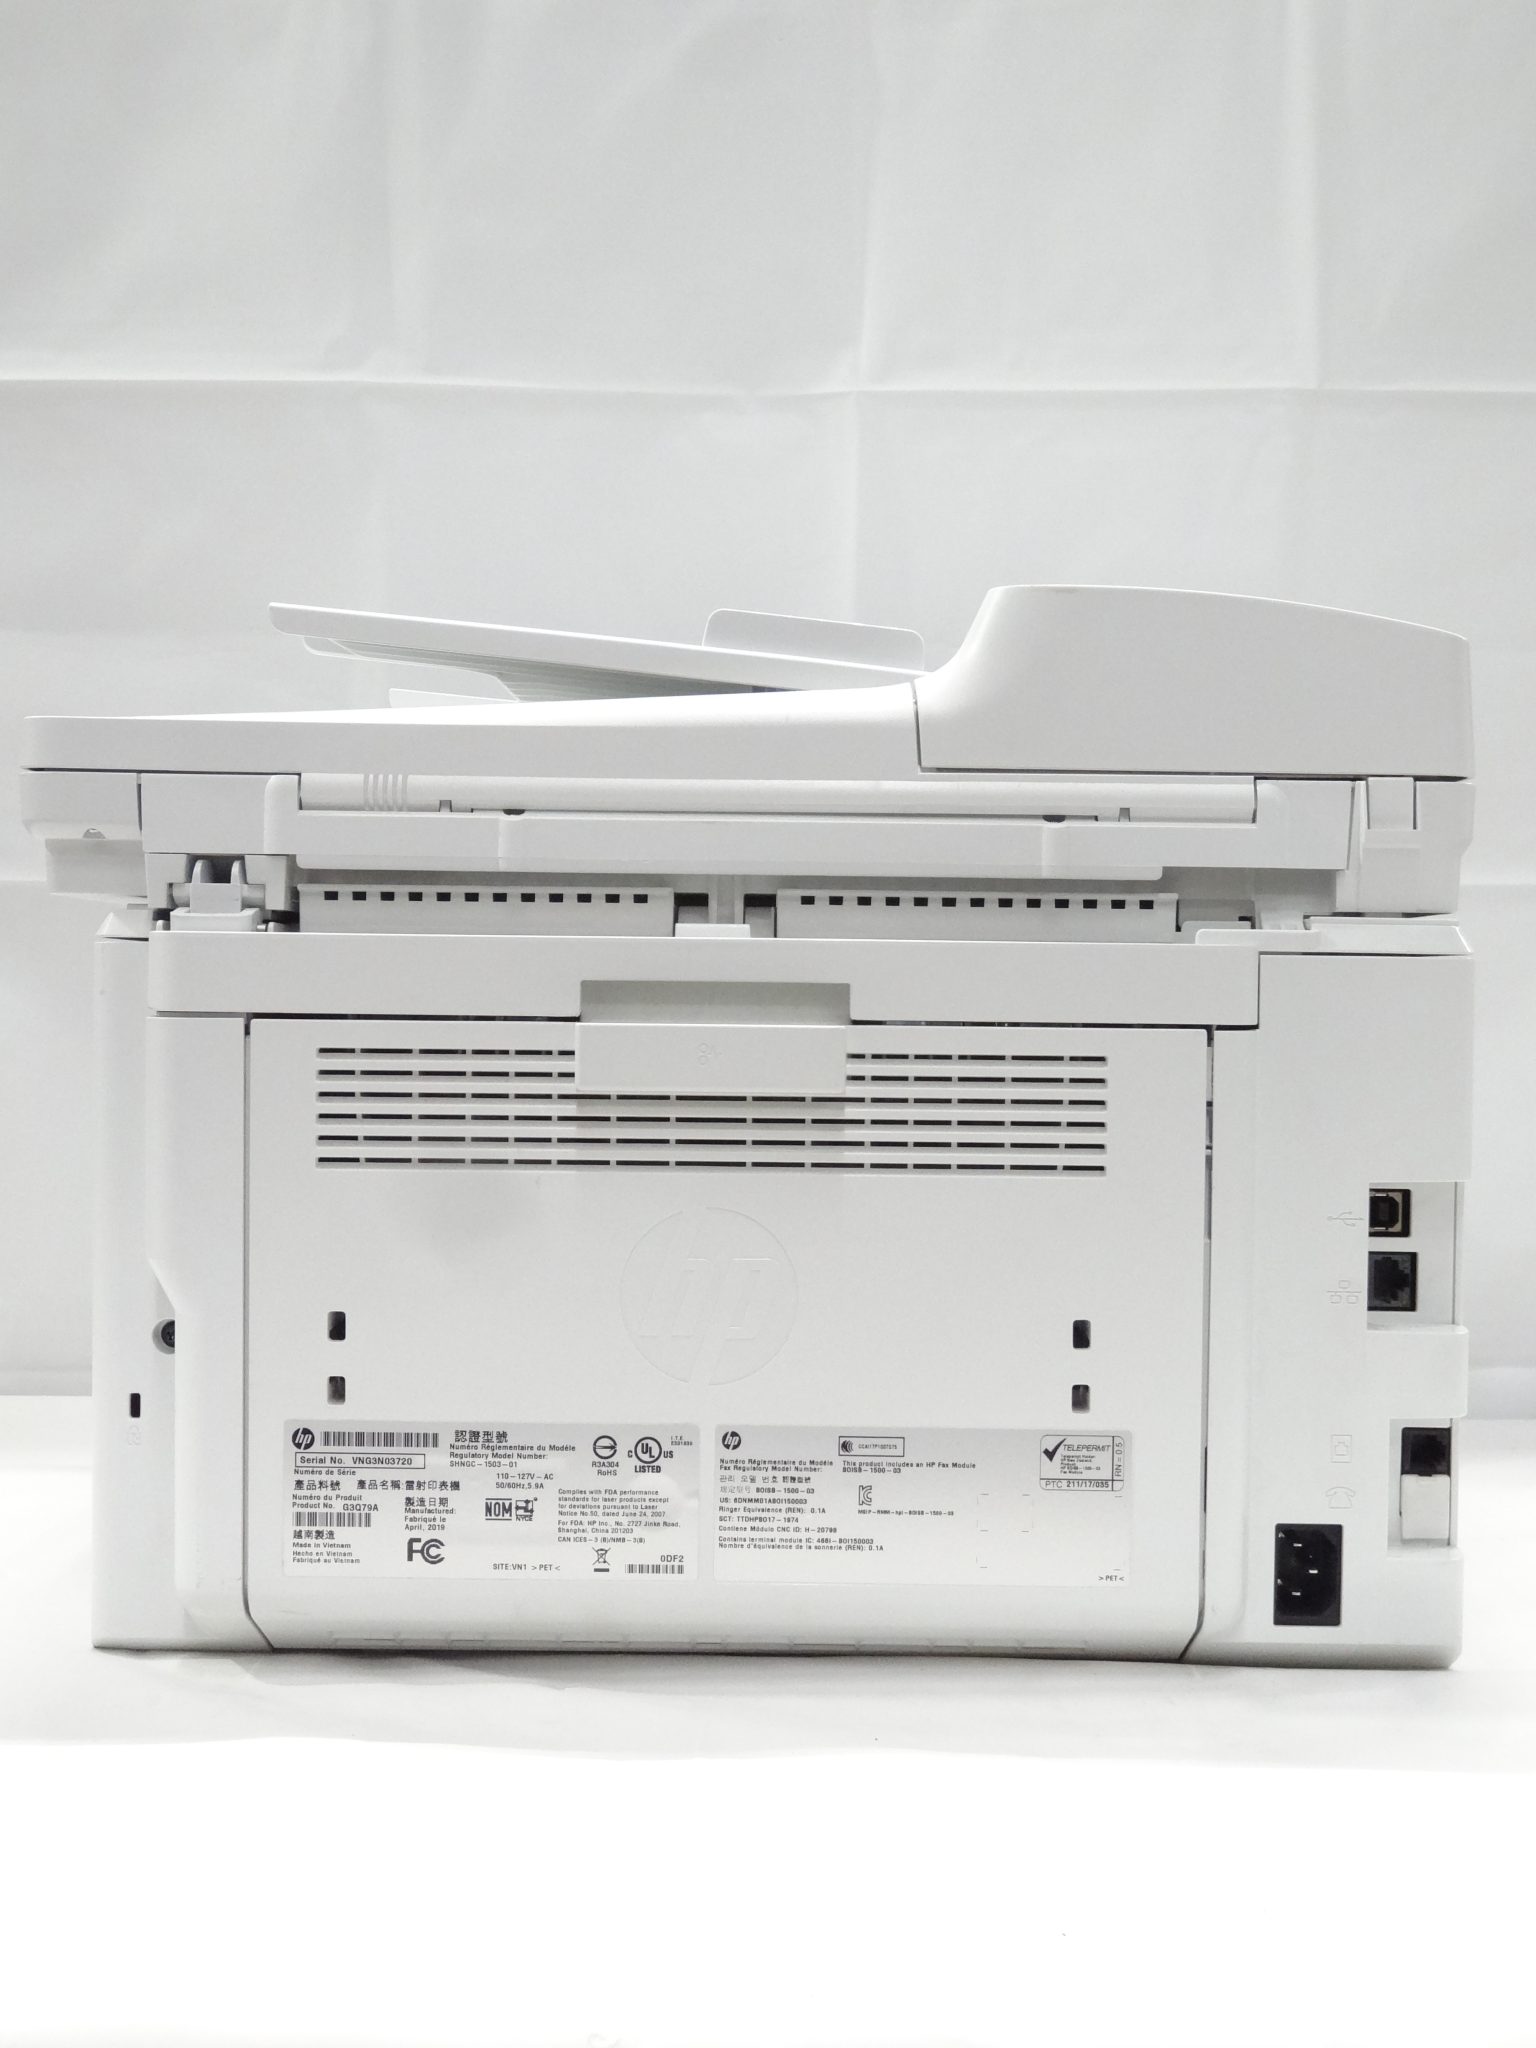 Solutions HP MFP M227fdn G3Q79A All-in-One Fax Ethernet USB Printer 16,189 PC - Solutions